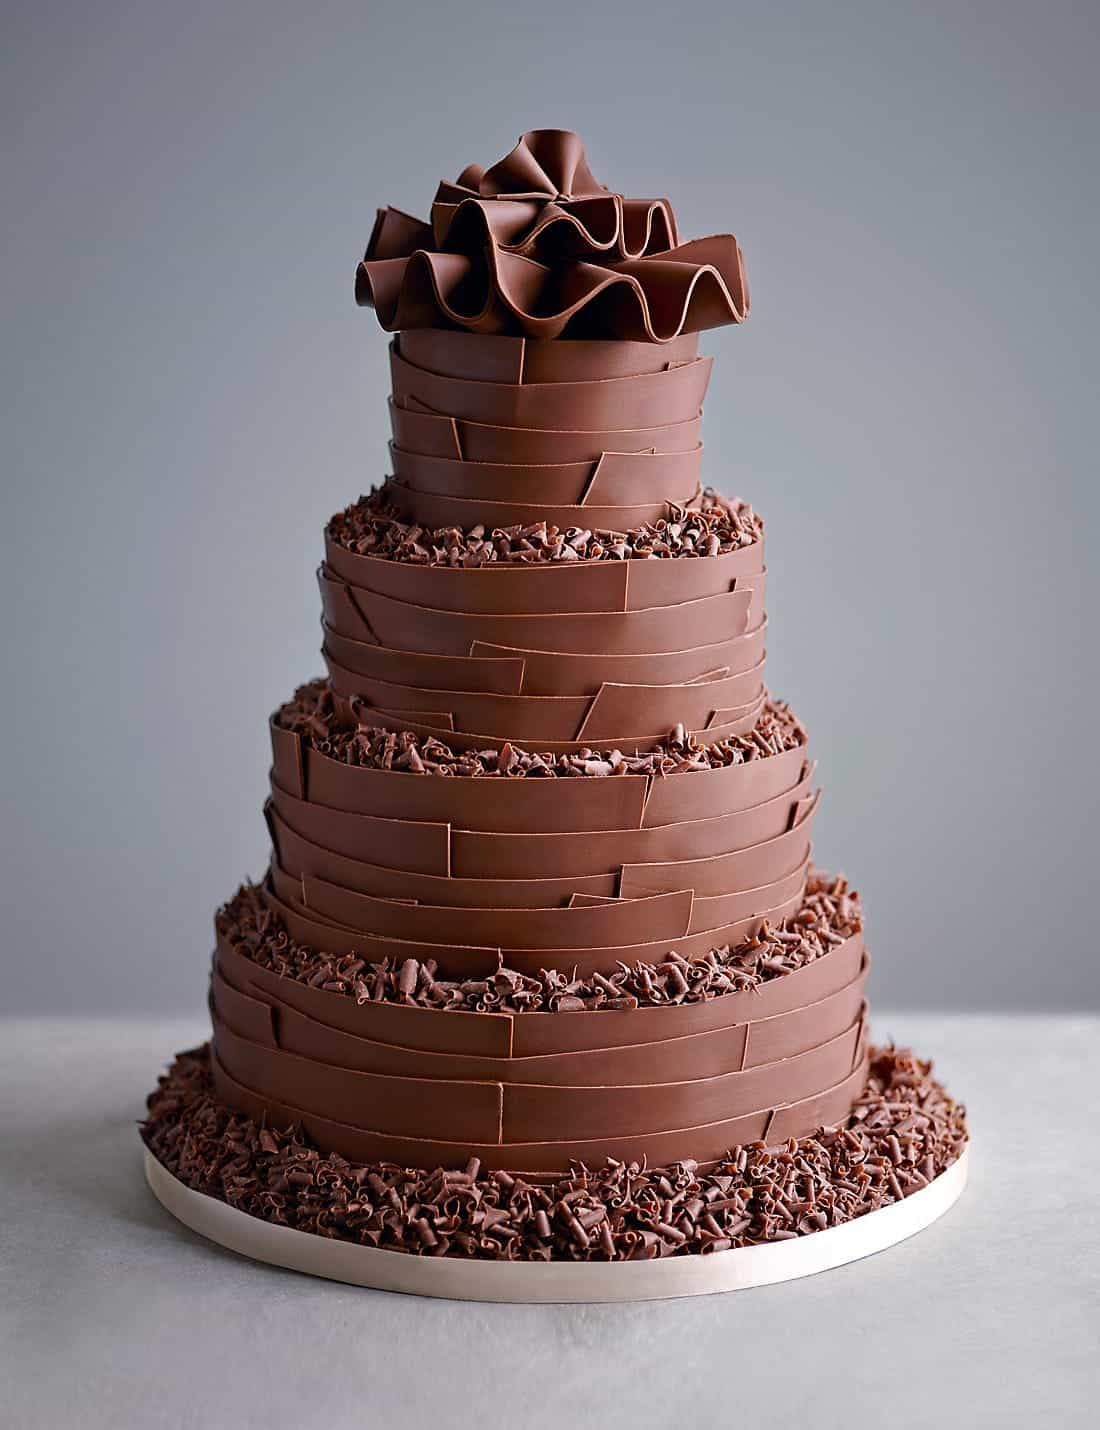 CHOCOLATE FLECKED LAYER CAKE WITH MILK CHOCOLATE FROSTING (View 28 of 30)